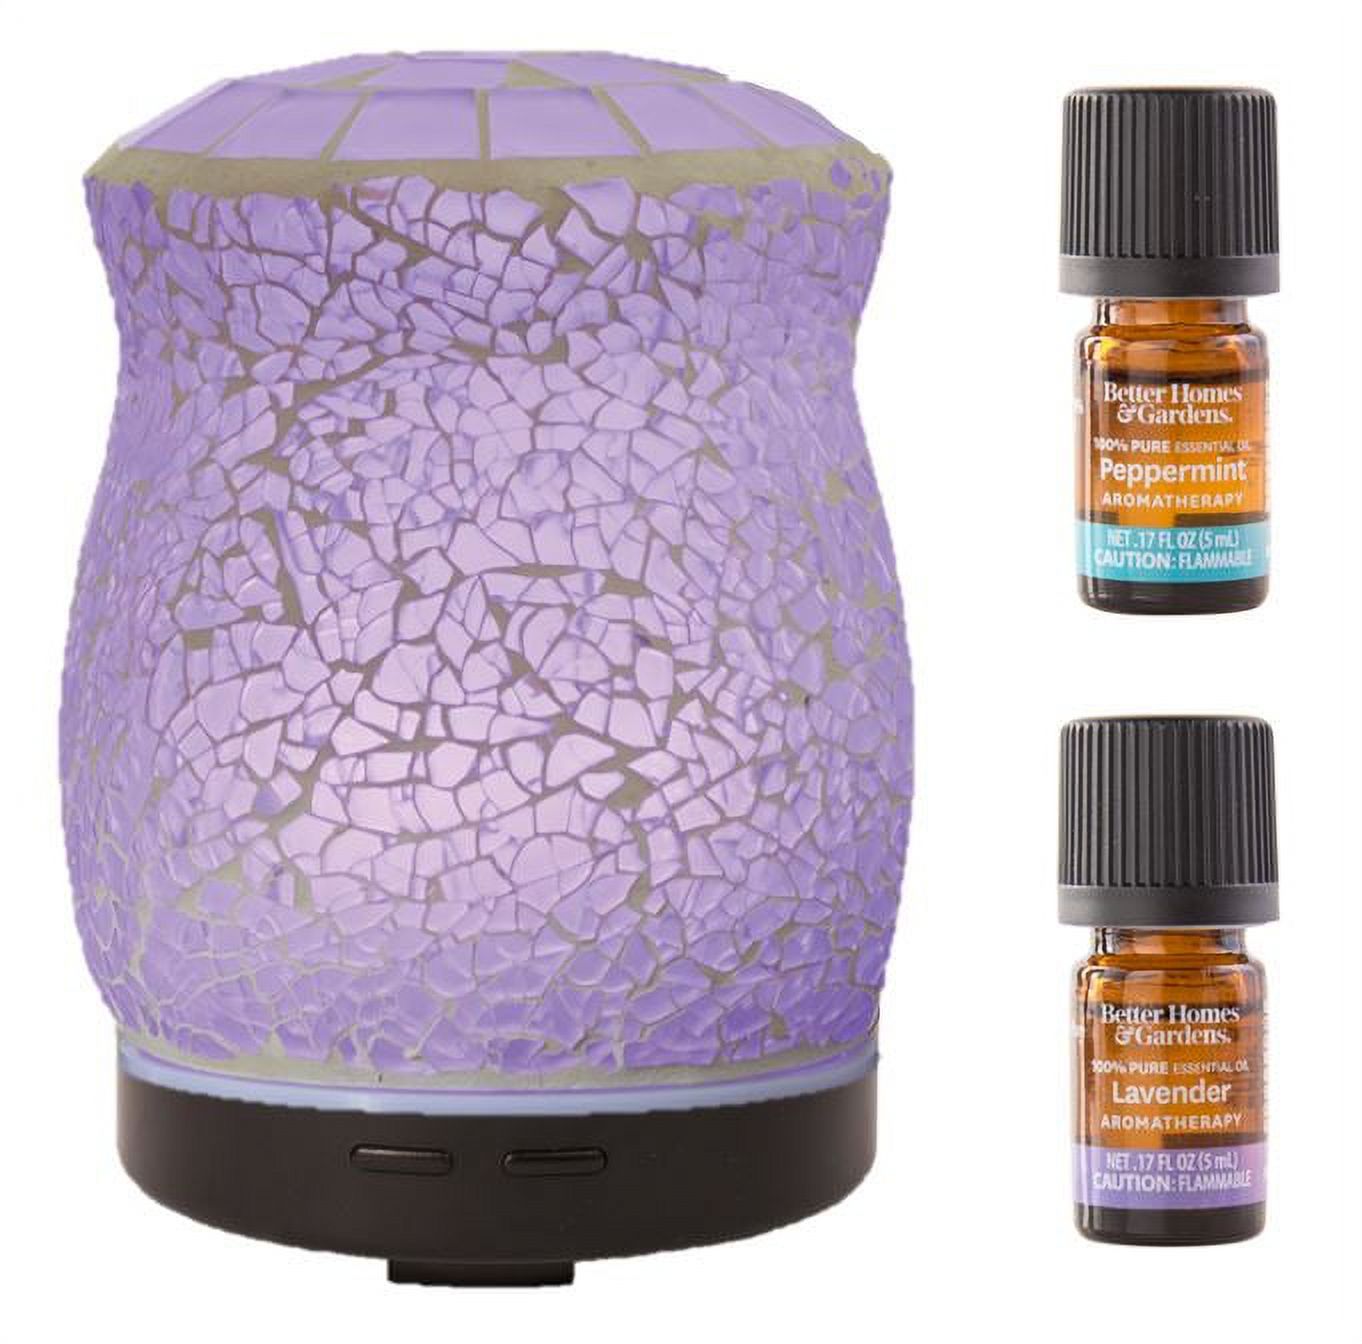 Better Homes & Gardens 3 Pieces Diffuser Gift Set, Crackled Mosaic, 100 mL - image 1 of 4